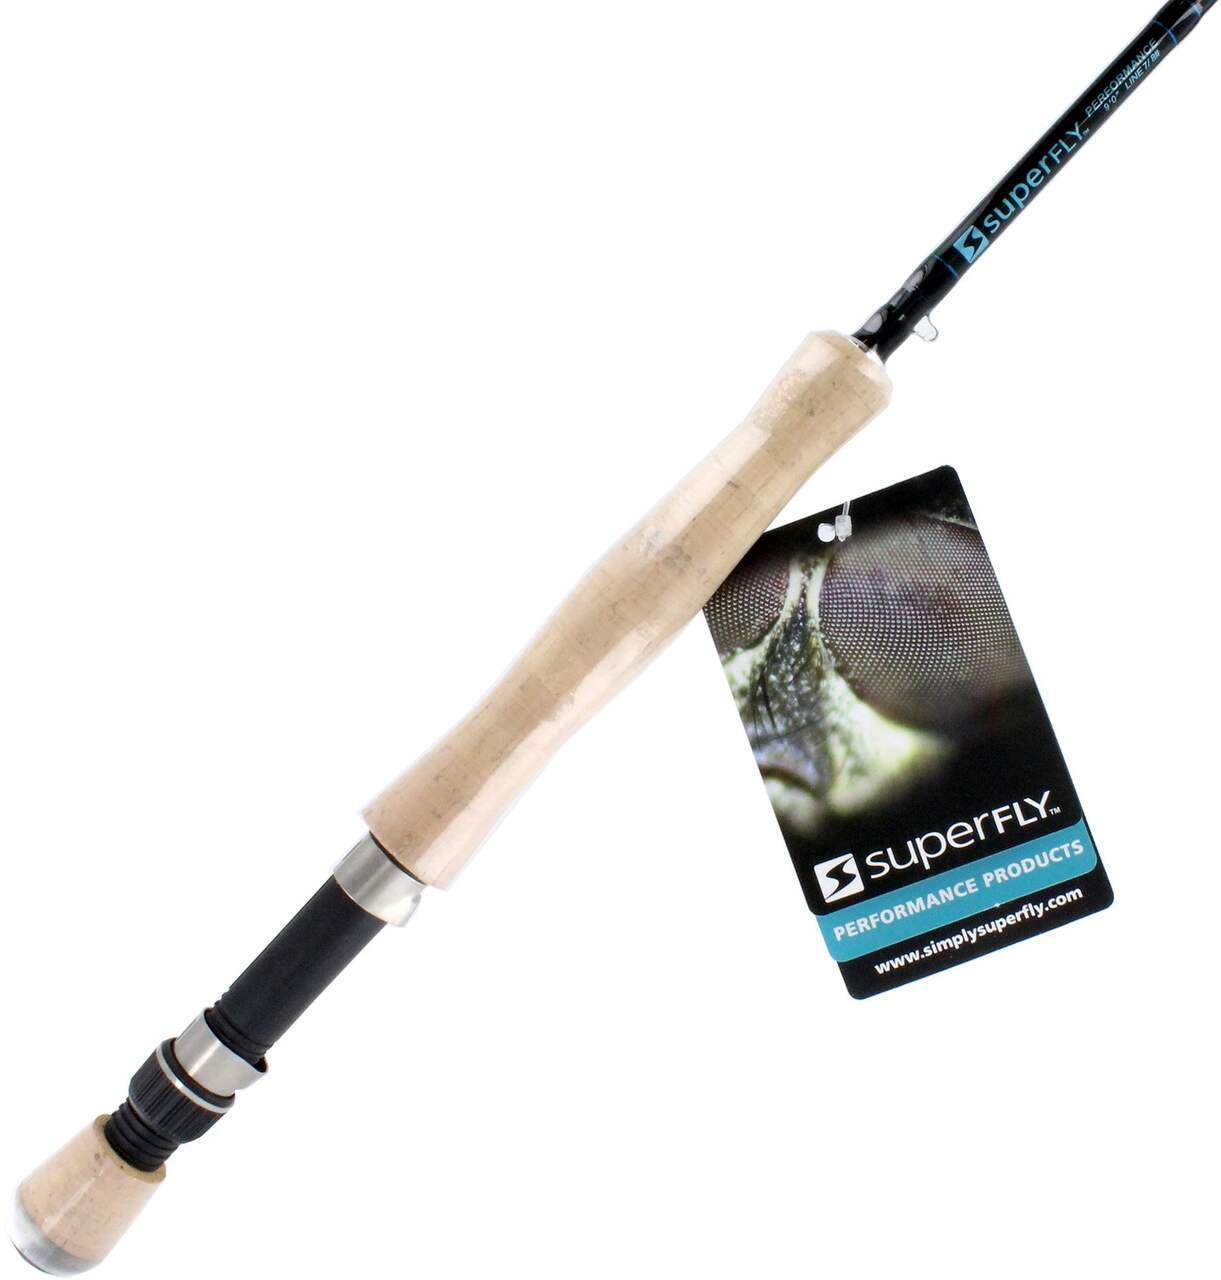 Buy Goture Fly Fishing Rod - 9ft 4 Piece Fishing Rod for Sea, Freshwater  Saltwater, Travel Fly Fishing Rod for Walleye, Bass, Salmon, Trout - 5wt Fly  Rod Online at Low Prices